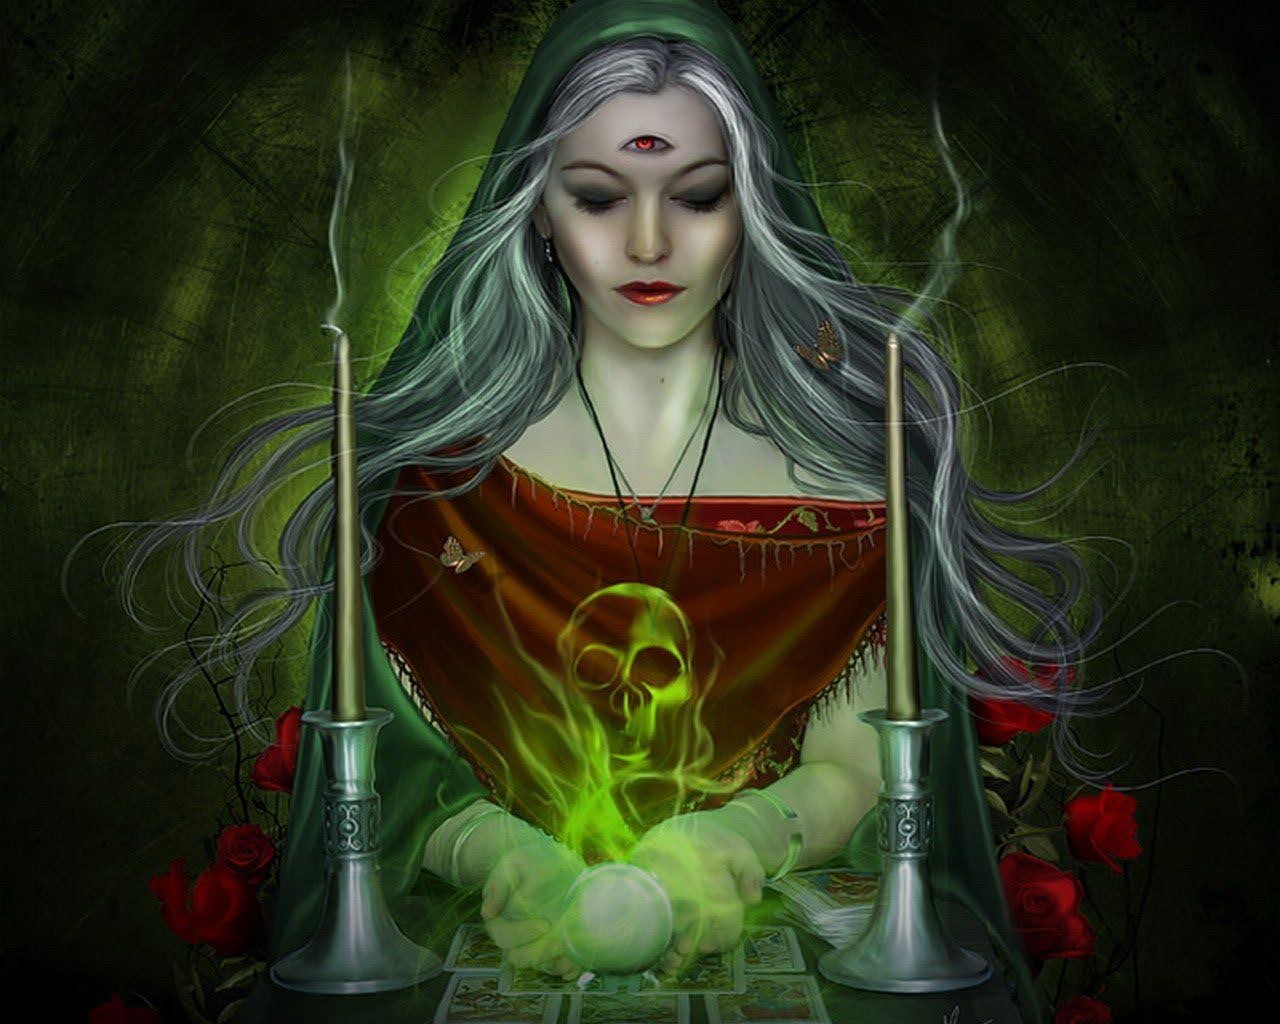 a woman in a green robe is holding a skull and candles performing magic.